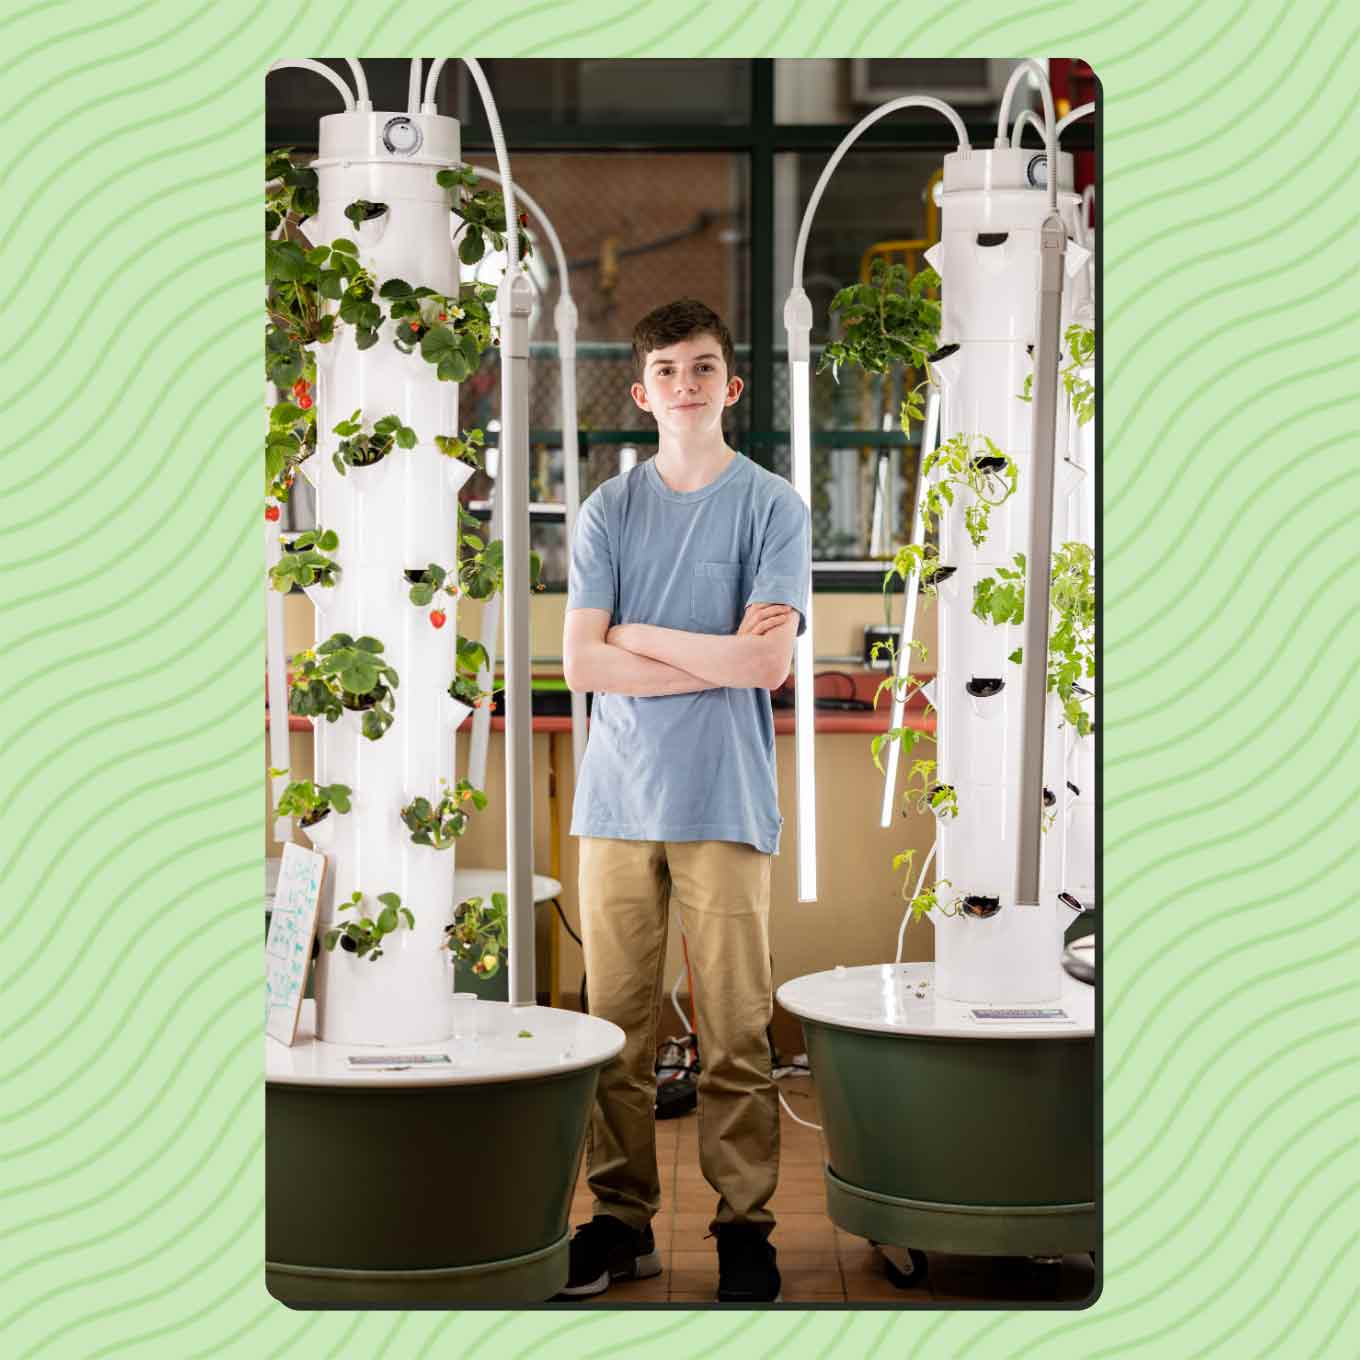 Steven Hoffen stands with his arms crossed among an indoor hydroponic garden.